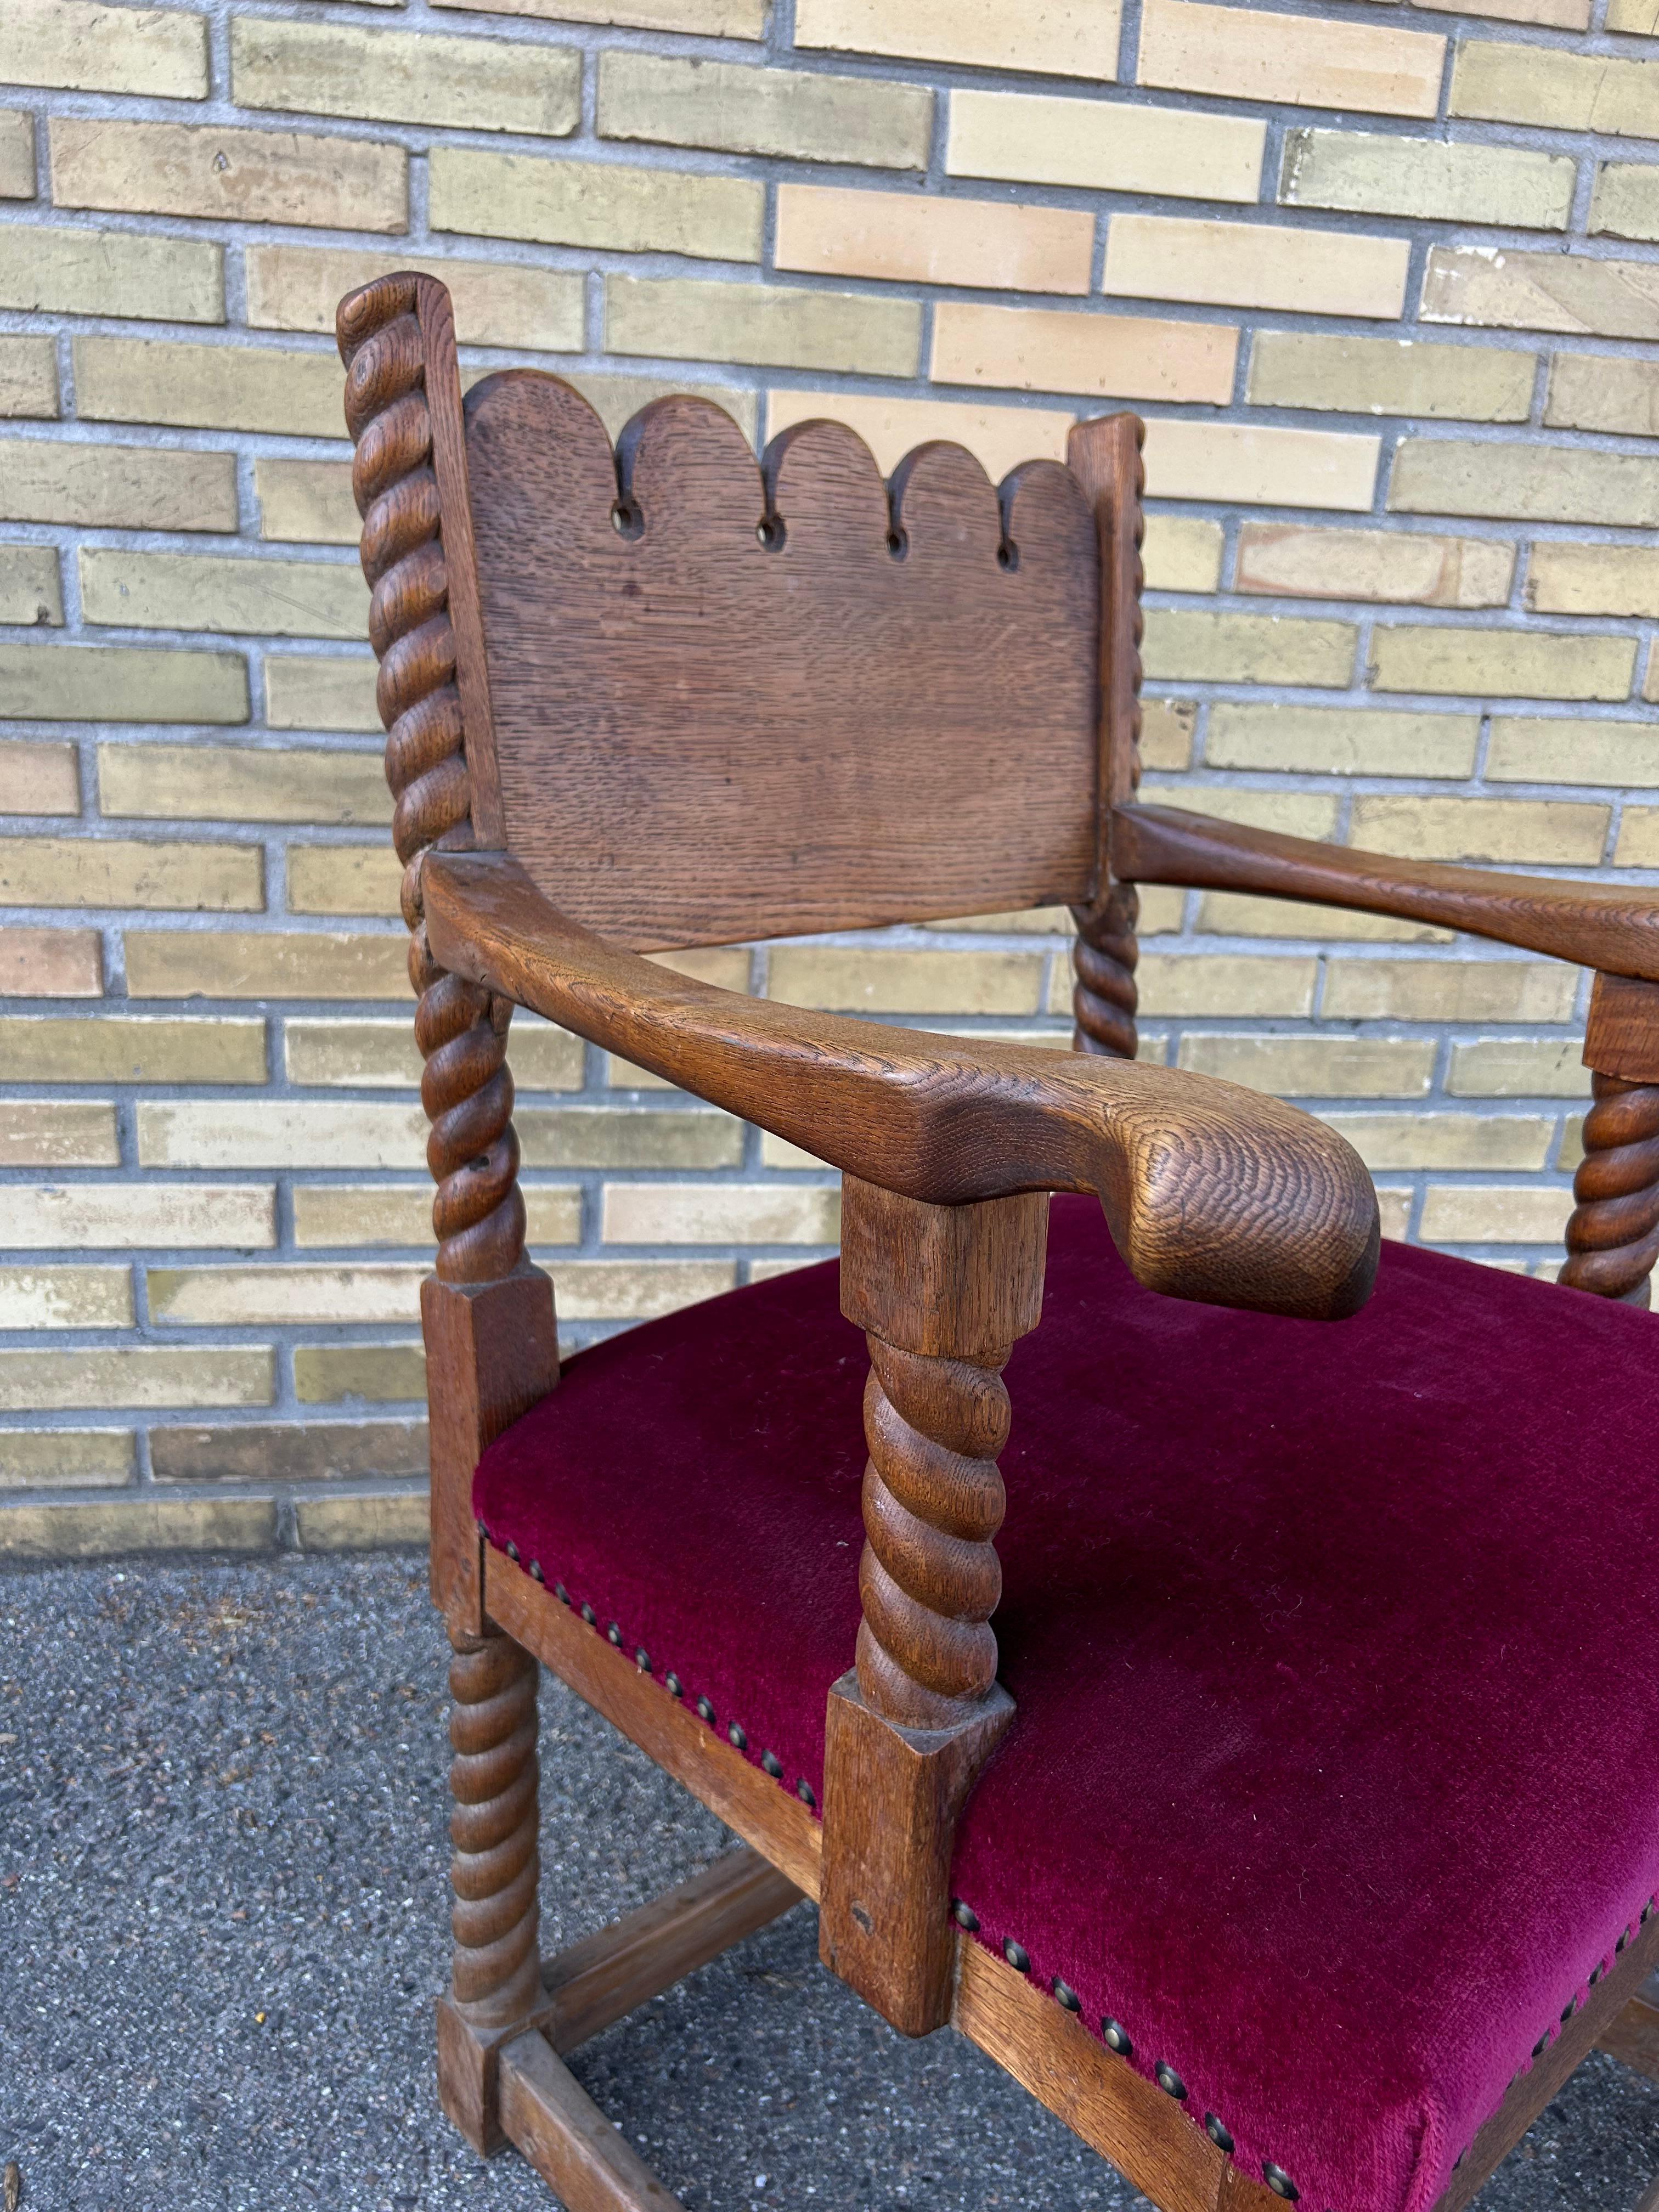 Rare decorative sculptural arts and crafts solid oak arm chair with original velvet upholstery with brass nails to hold the upholstery.
The chair is made by a unknown Danish craftsman in solid oak in the 1920’s.
The chair is the perfect decorative